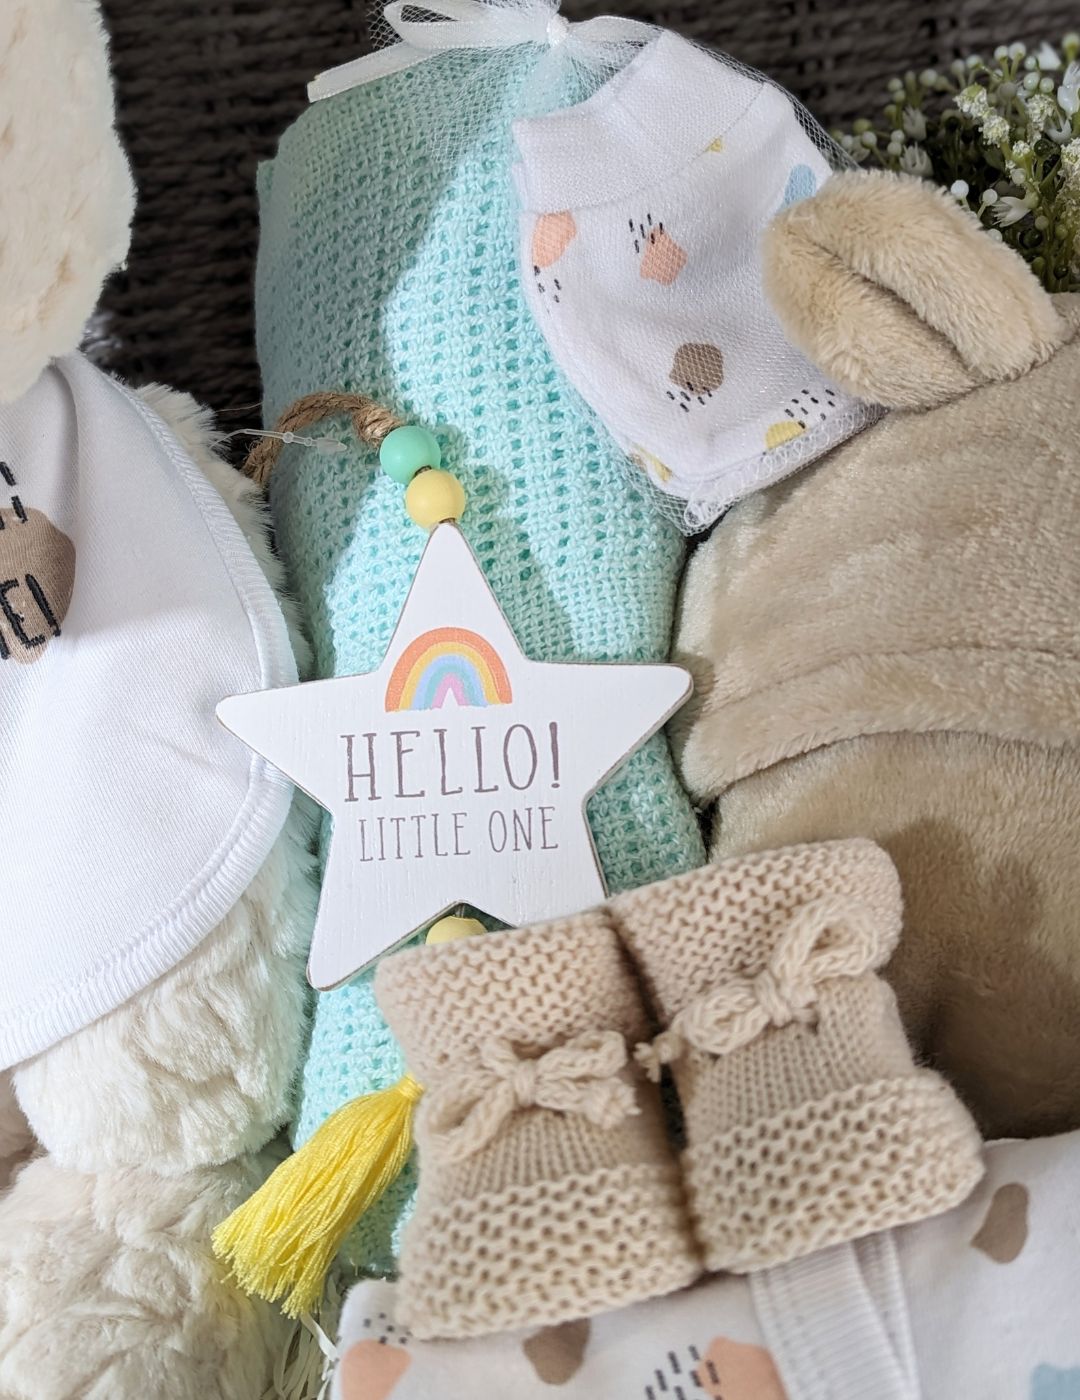 Large teddy bear baby basket with cuddly teddy bear, baby bath robe, muslin squares, baby booties and also a gift for mum. Presented in an eco rope basket.